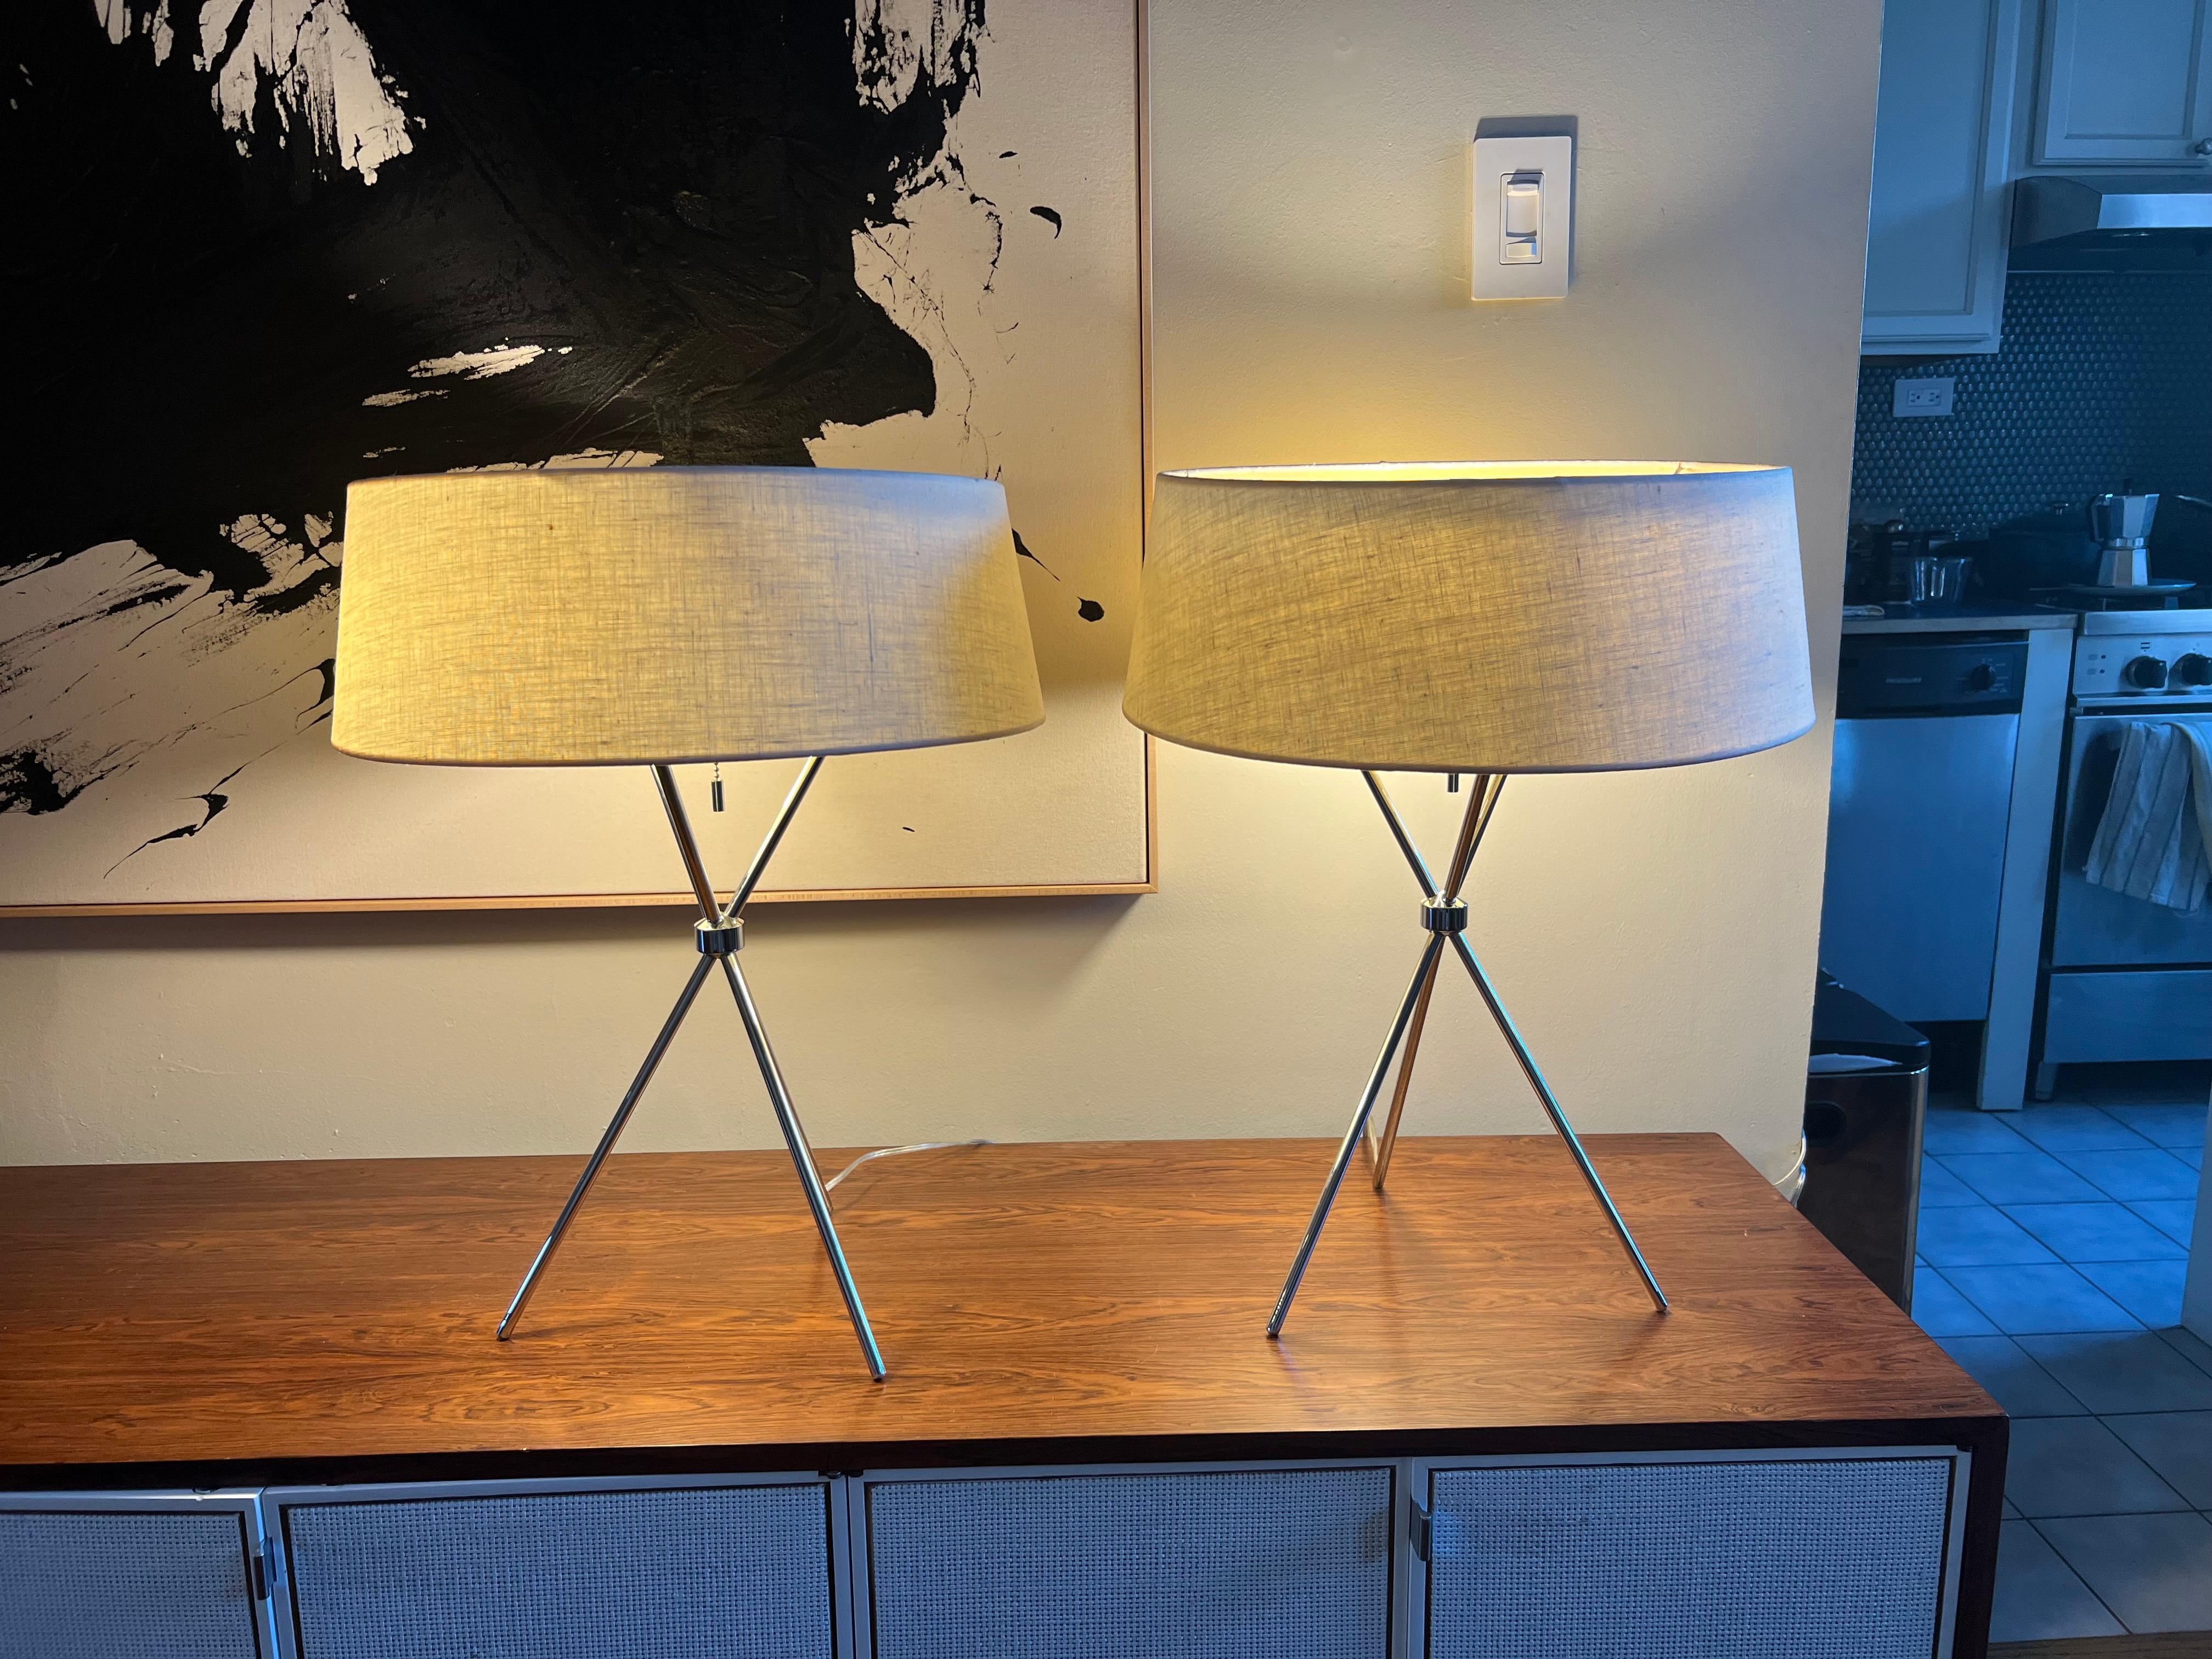 Pair of tripod table lamps model no. 170 in brass with 3 bulbs and shade by T.H. Robsjohn-Gibbings for Hansen Lighting, American 1960s. Original shades and wiring.  Price is for the pair.